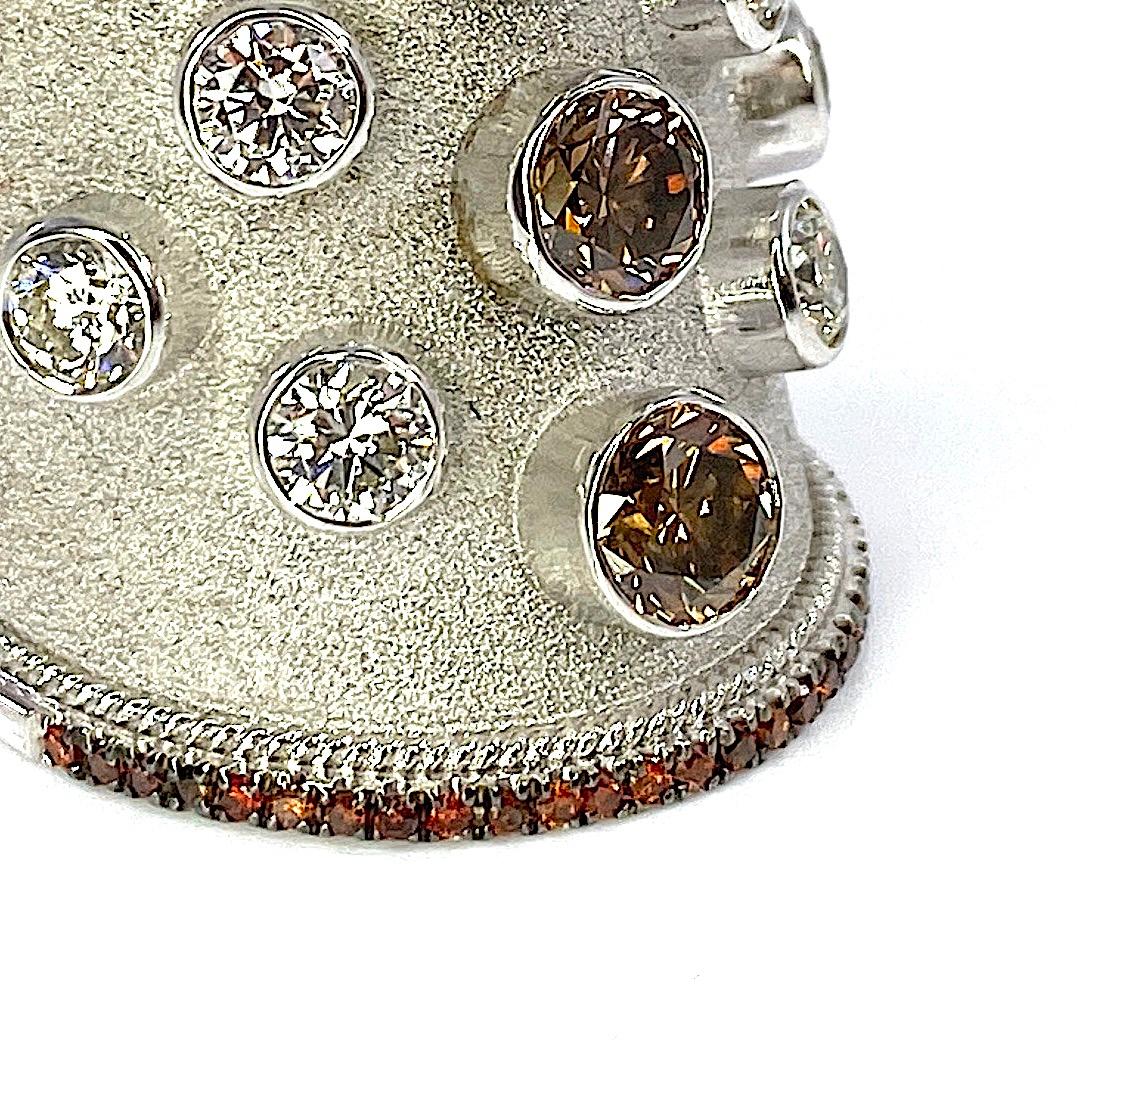 This unique S.Georgios designer 18 Karat Solid White Gold Wide Ring is all handmade in Byzantine style with a stunning  velvet background and it is set with 1.87 Carats of 3 Brilliant-cut Brown Diamonds in the center line and 0.35 Carats of